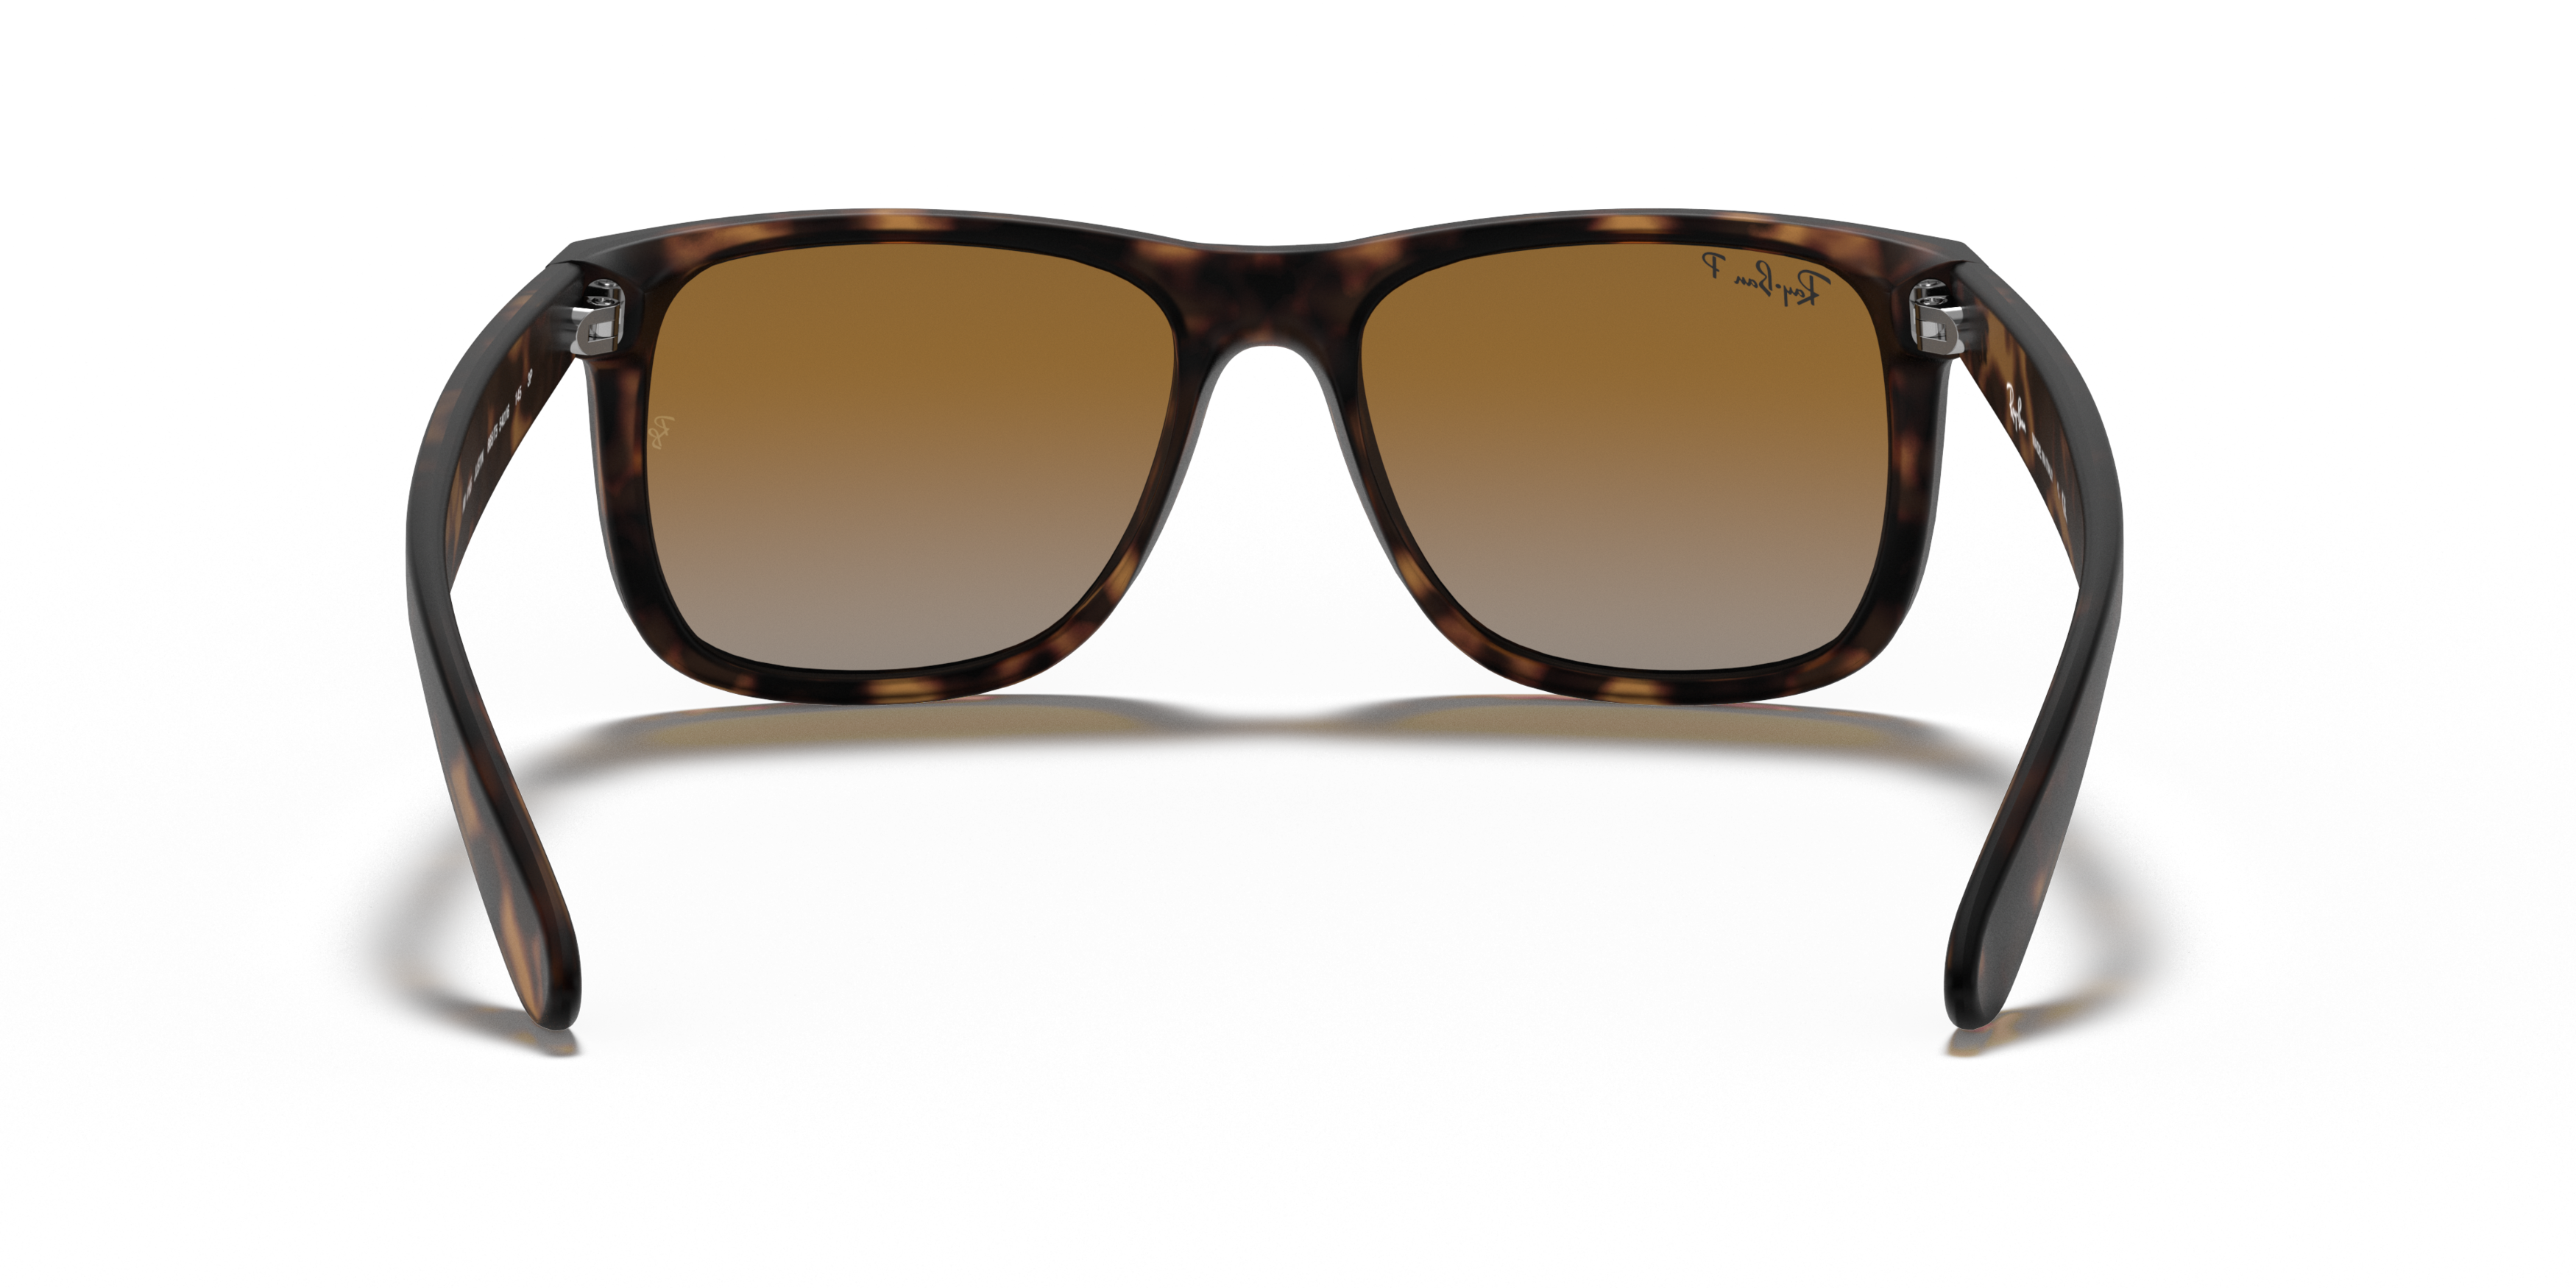 Detail02 Ray-Ban Justin RB 4165 Sunglasses Brown / Tortoise Shell